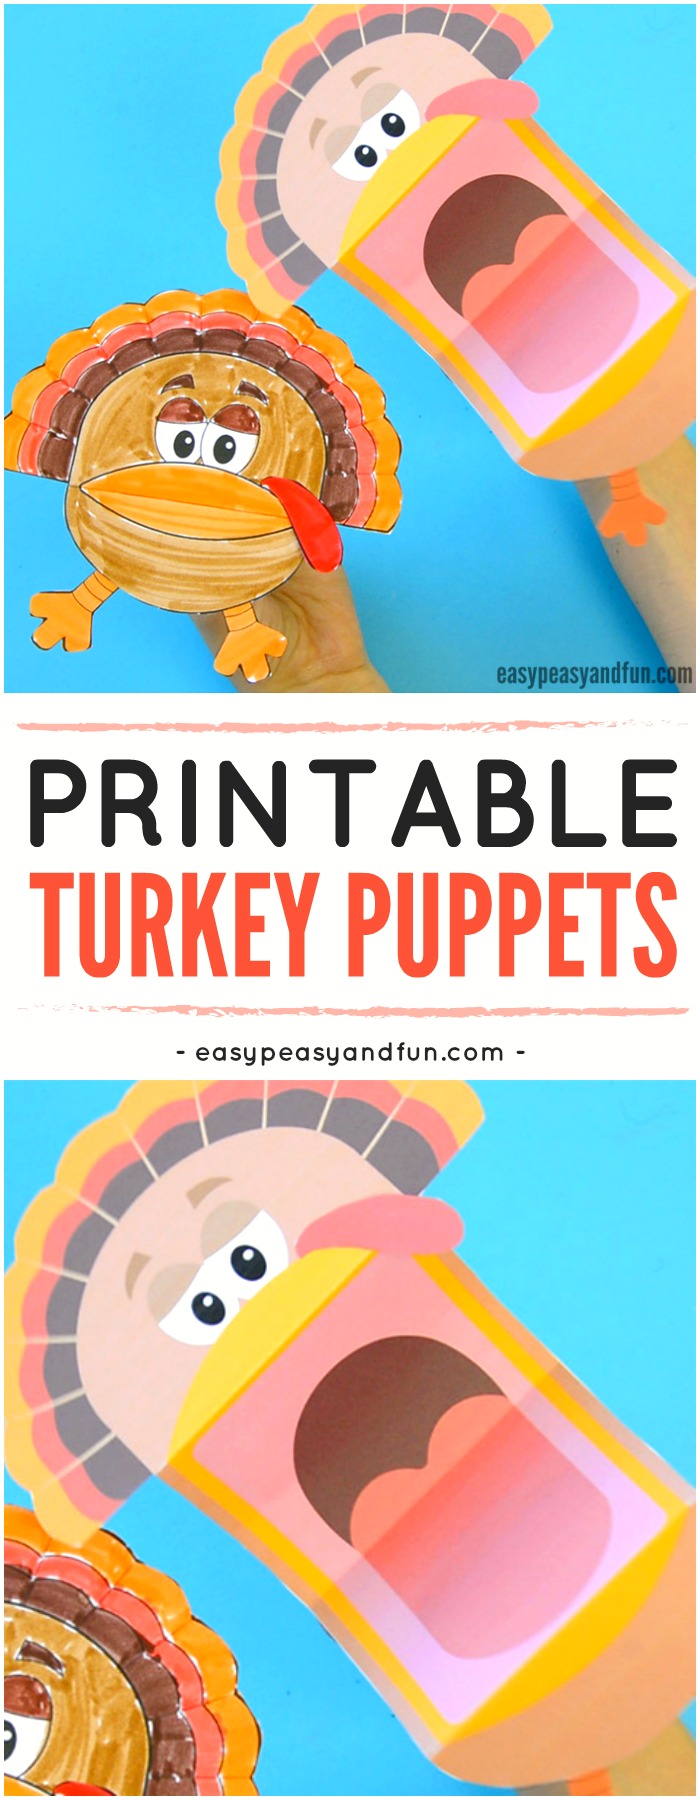 Printable turkey doll craft for kids. Super fun Thanksgiving and autumn activities for kids. #Craftforkids #ThanksgivingCraftforkids #Printable Dolls